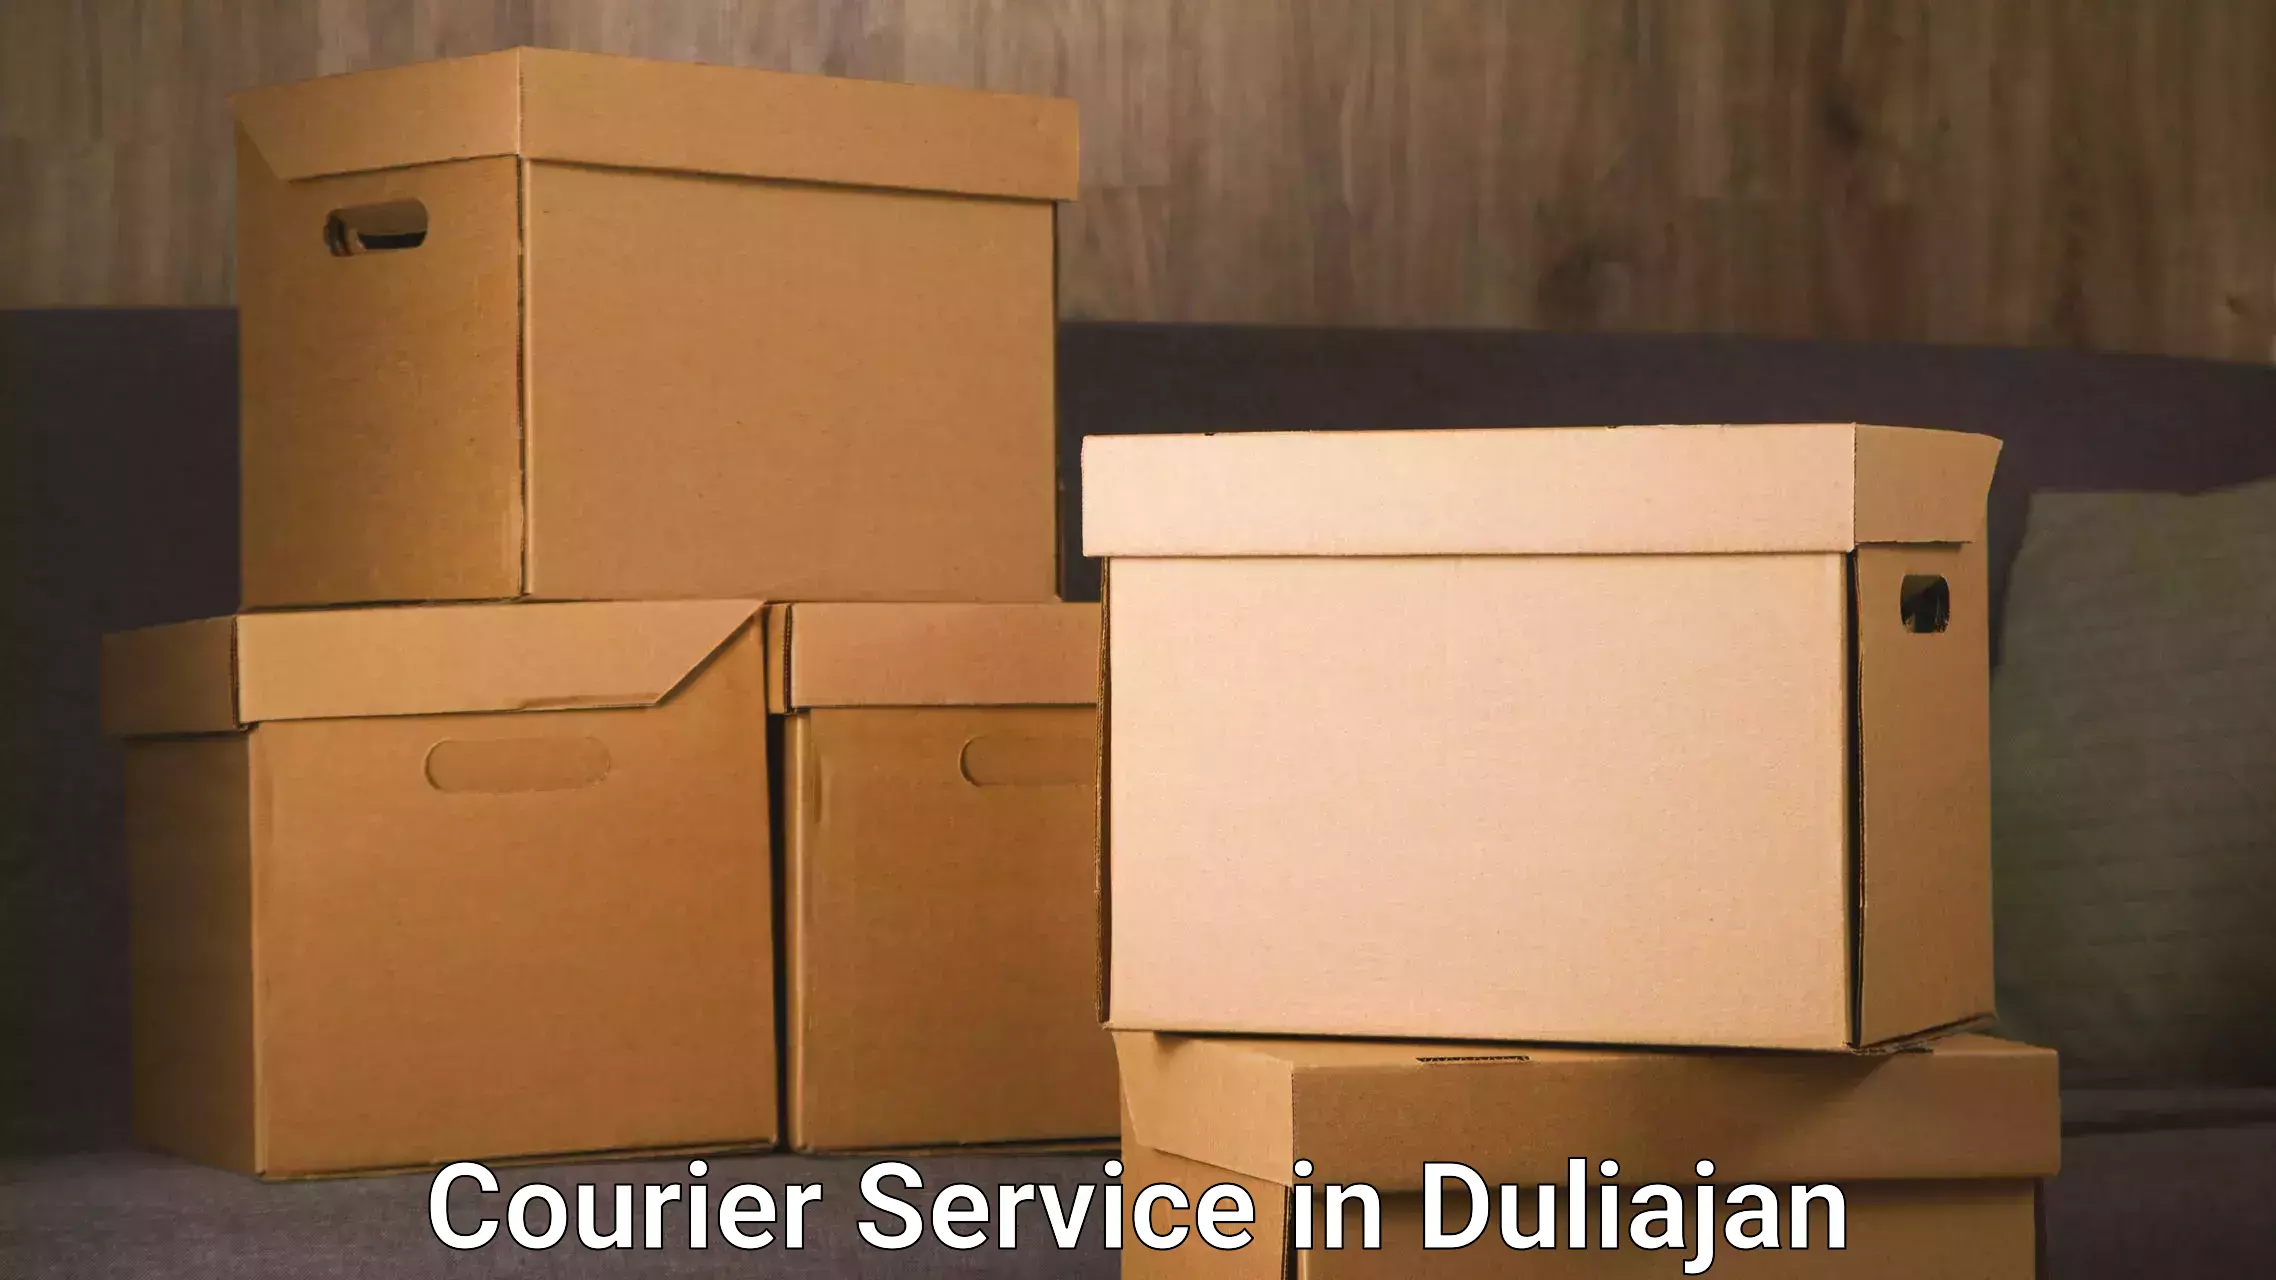 Express delivery solutions in Duliajan